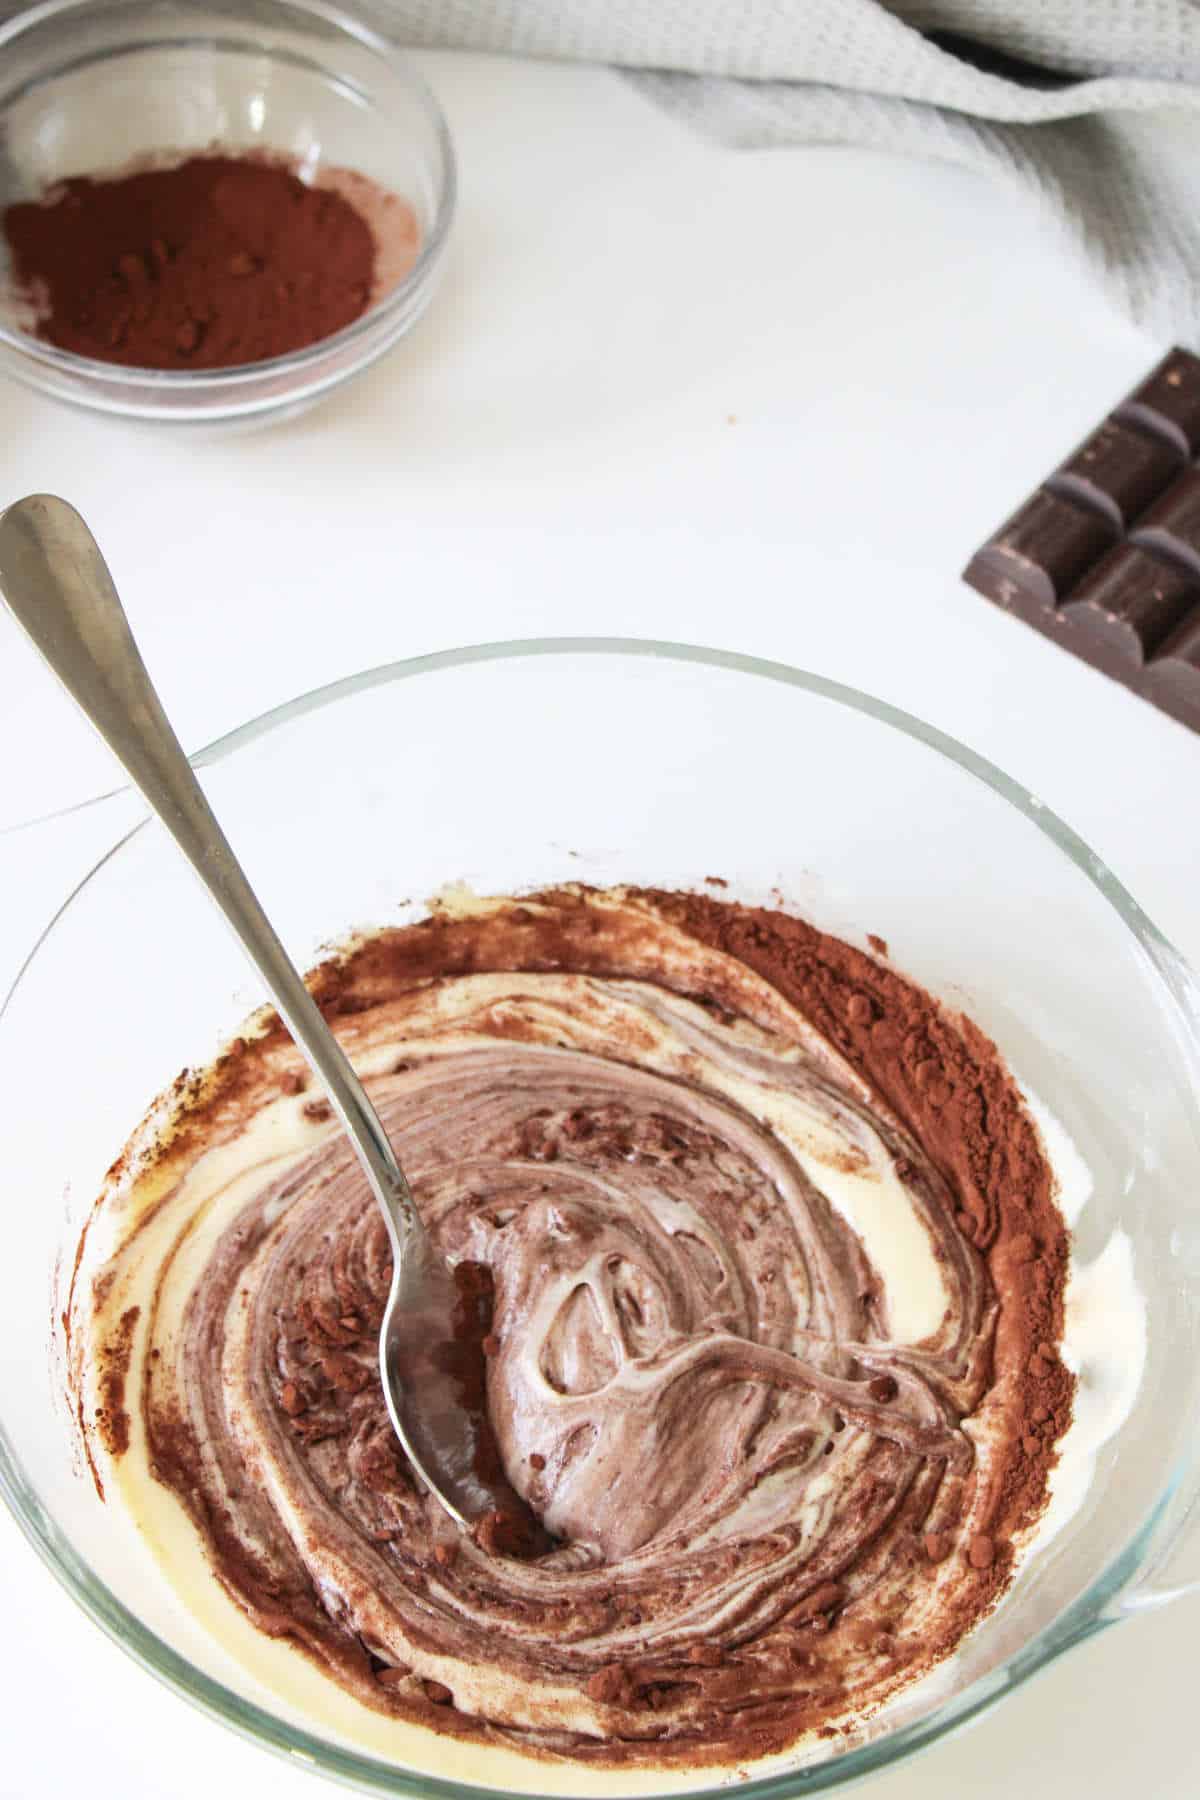 blending in melted chocolate into part of the cake batter.